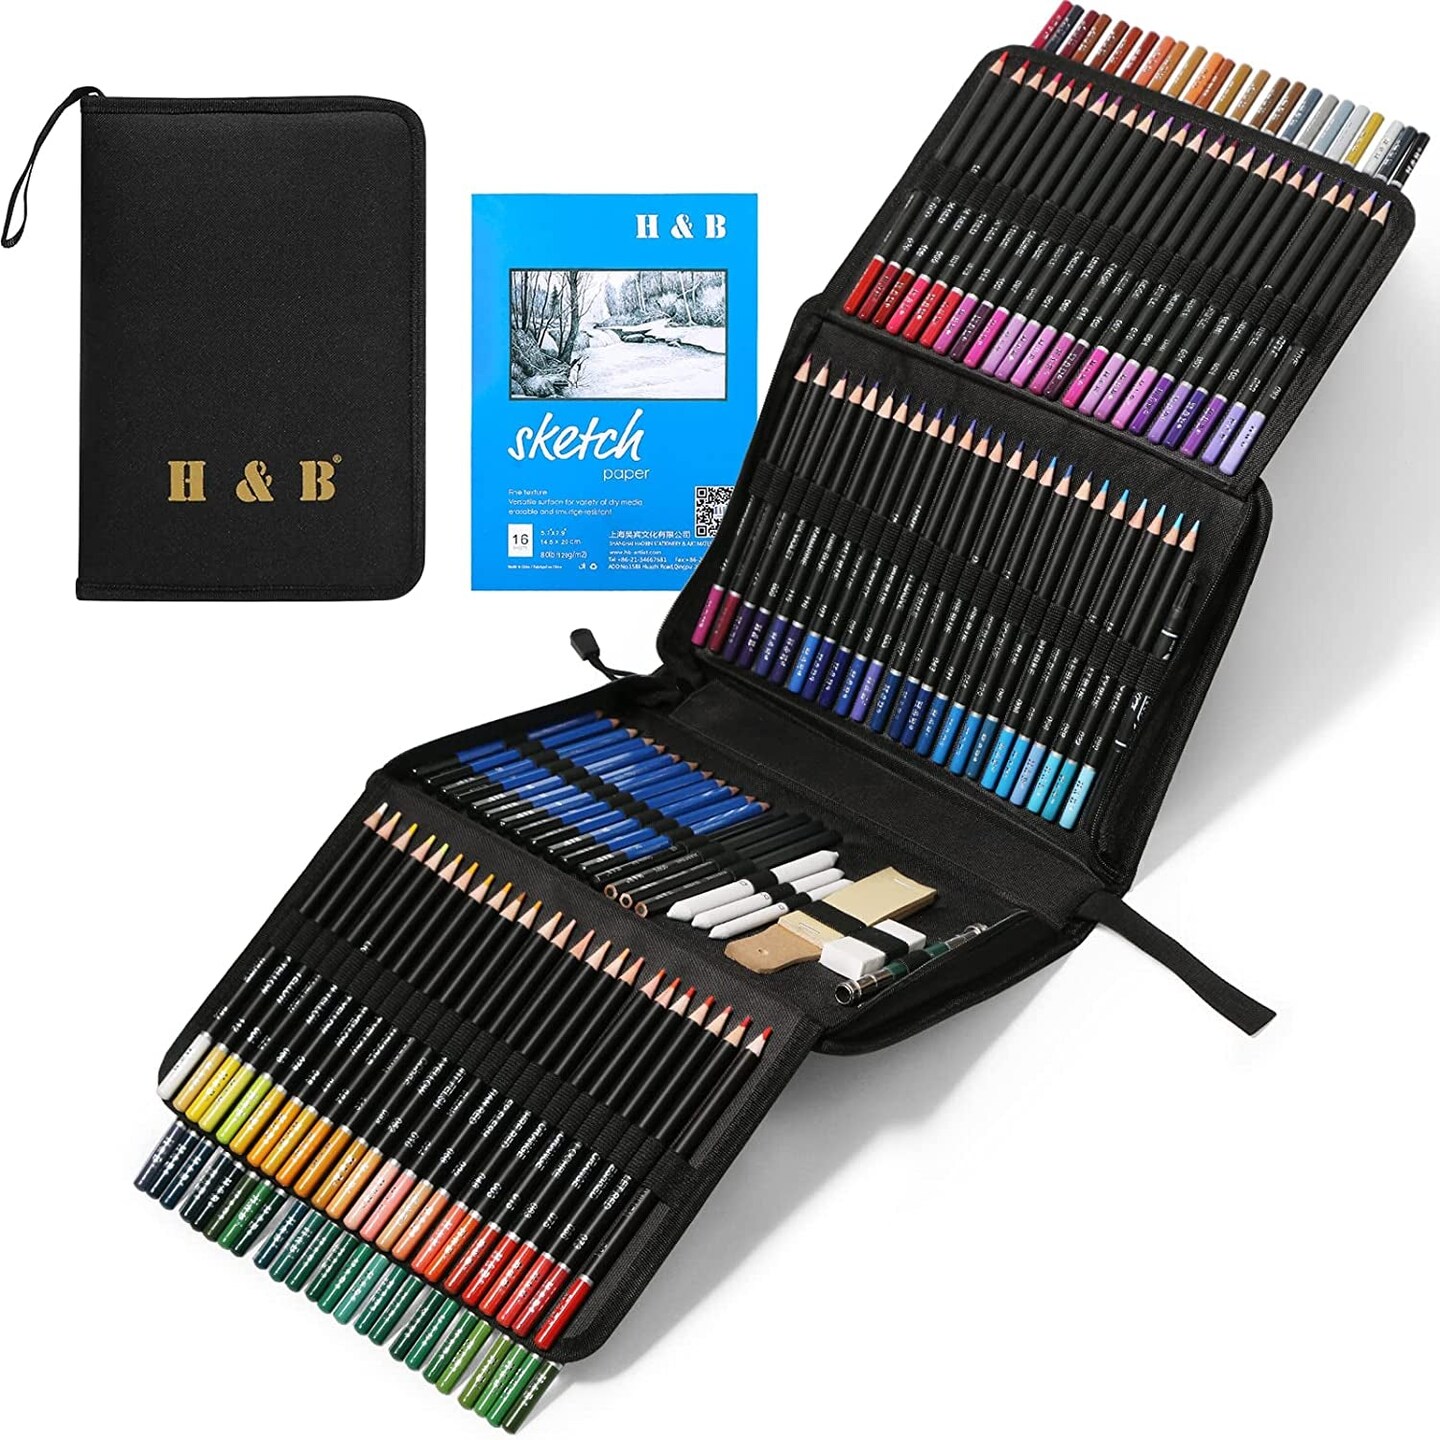 33 Piece Drawing and Sketch Kit